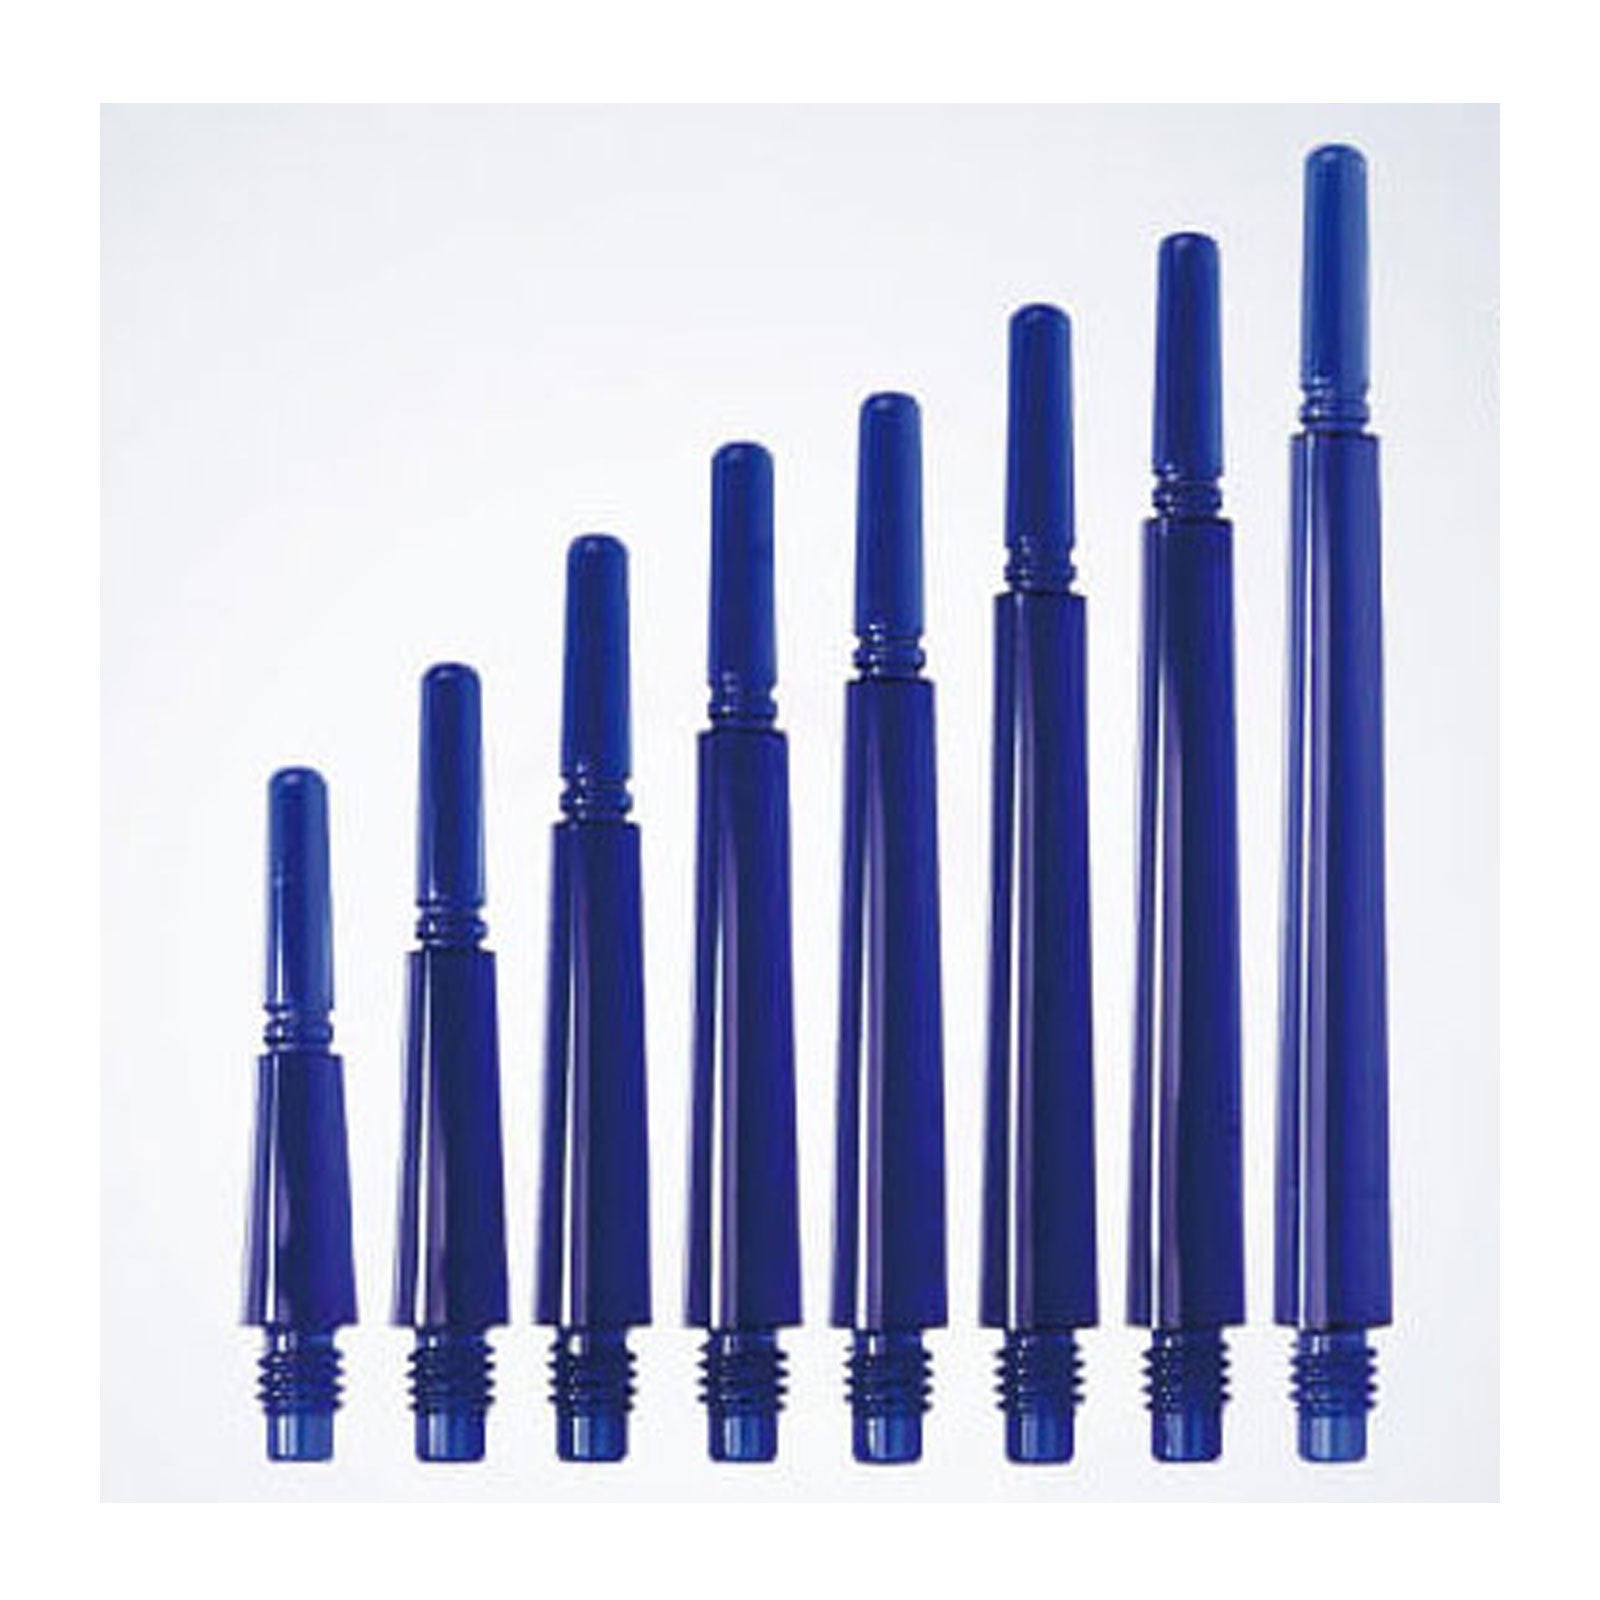 Cosmo Stems - Normal Locked Clear Dark Blue Shafts - Sizes 1 - 8